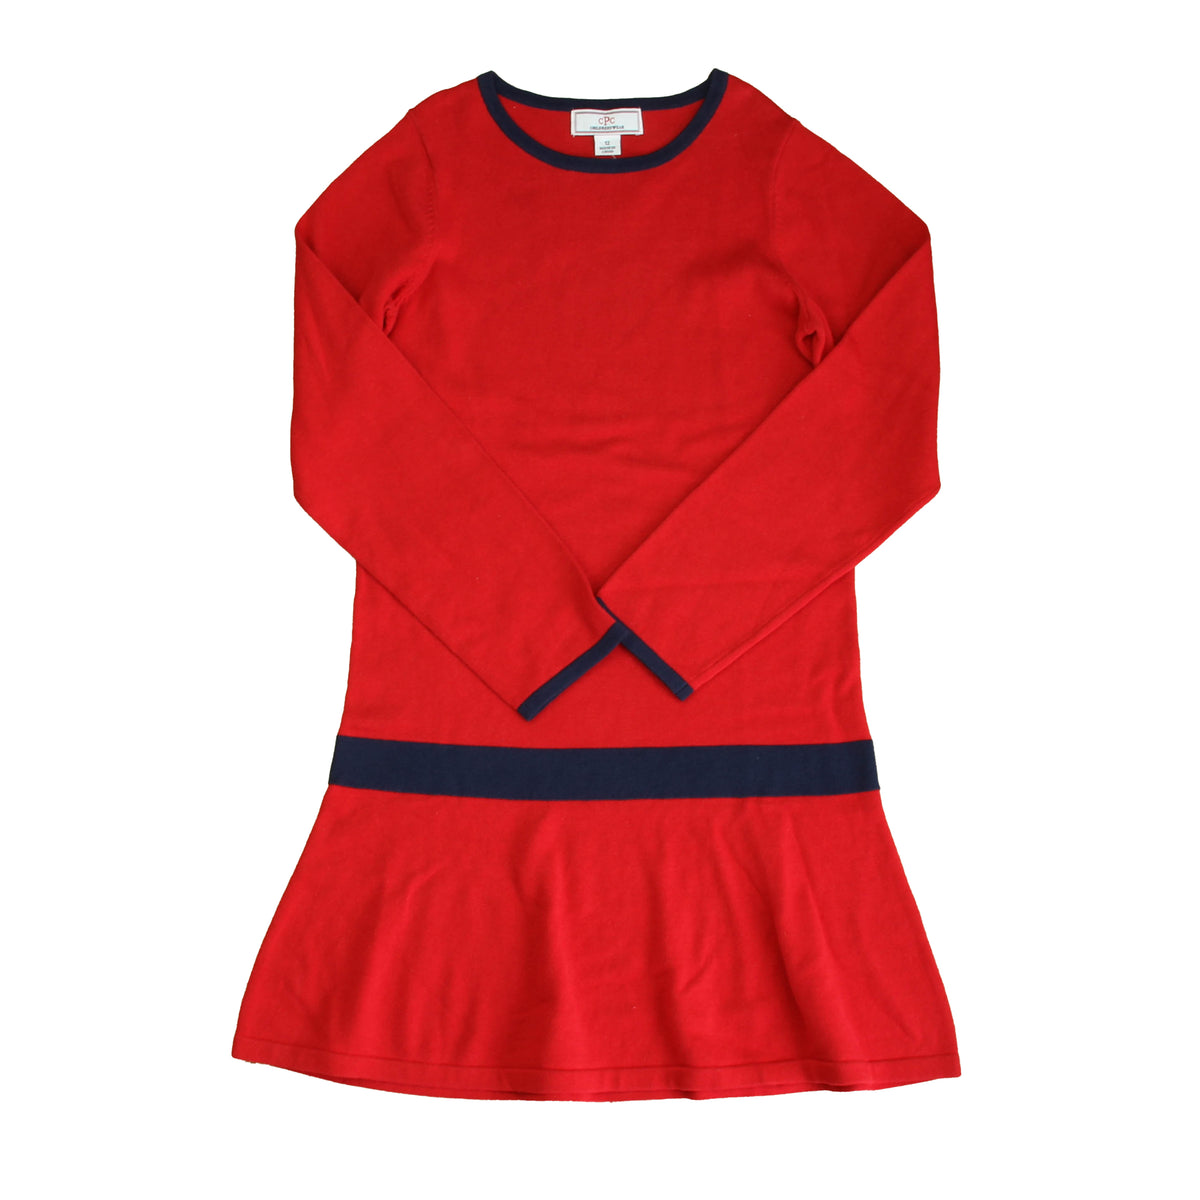 New with Tags: Red | Navy Dress size: 6-14 Years -- FINAL SALE